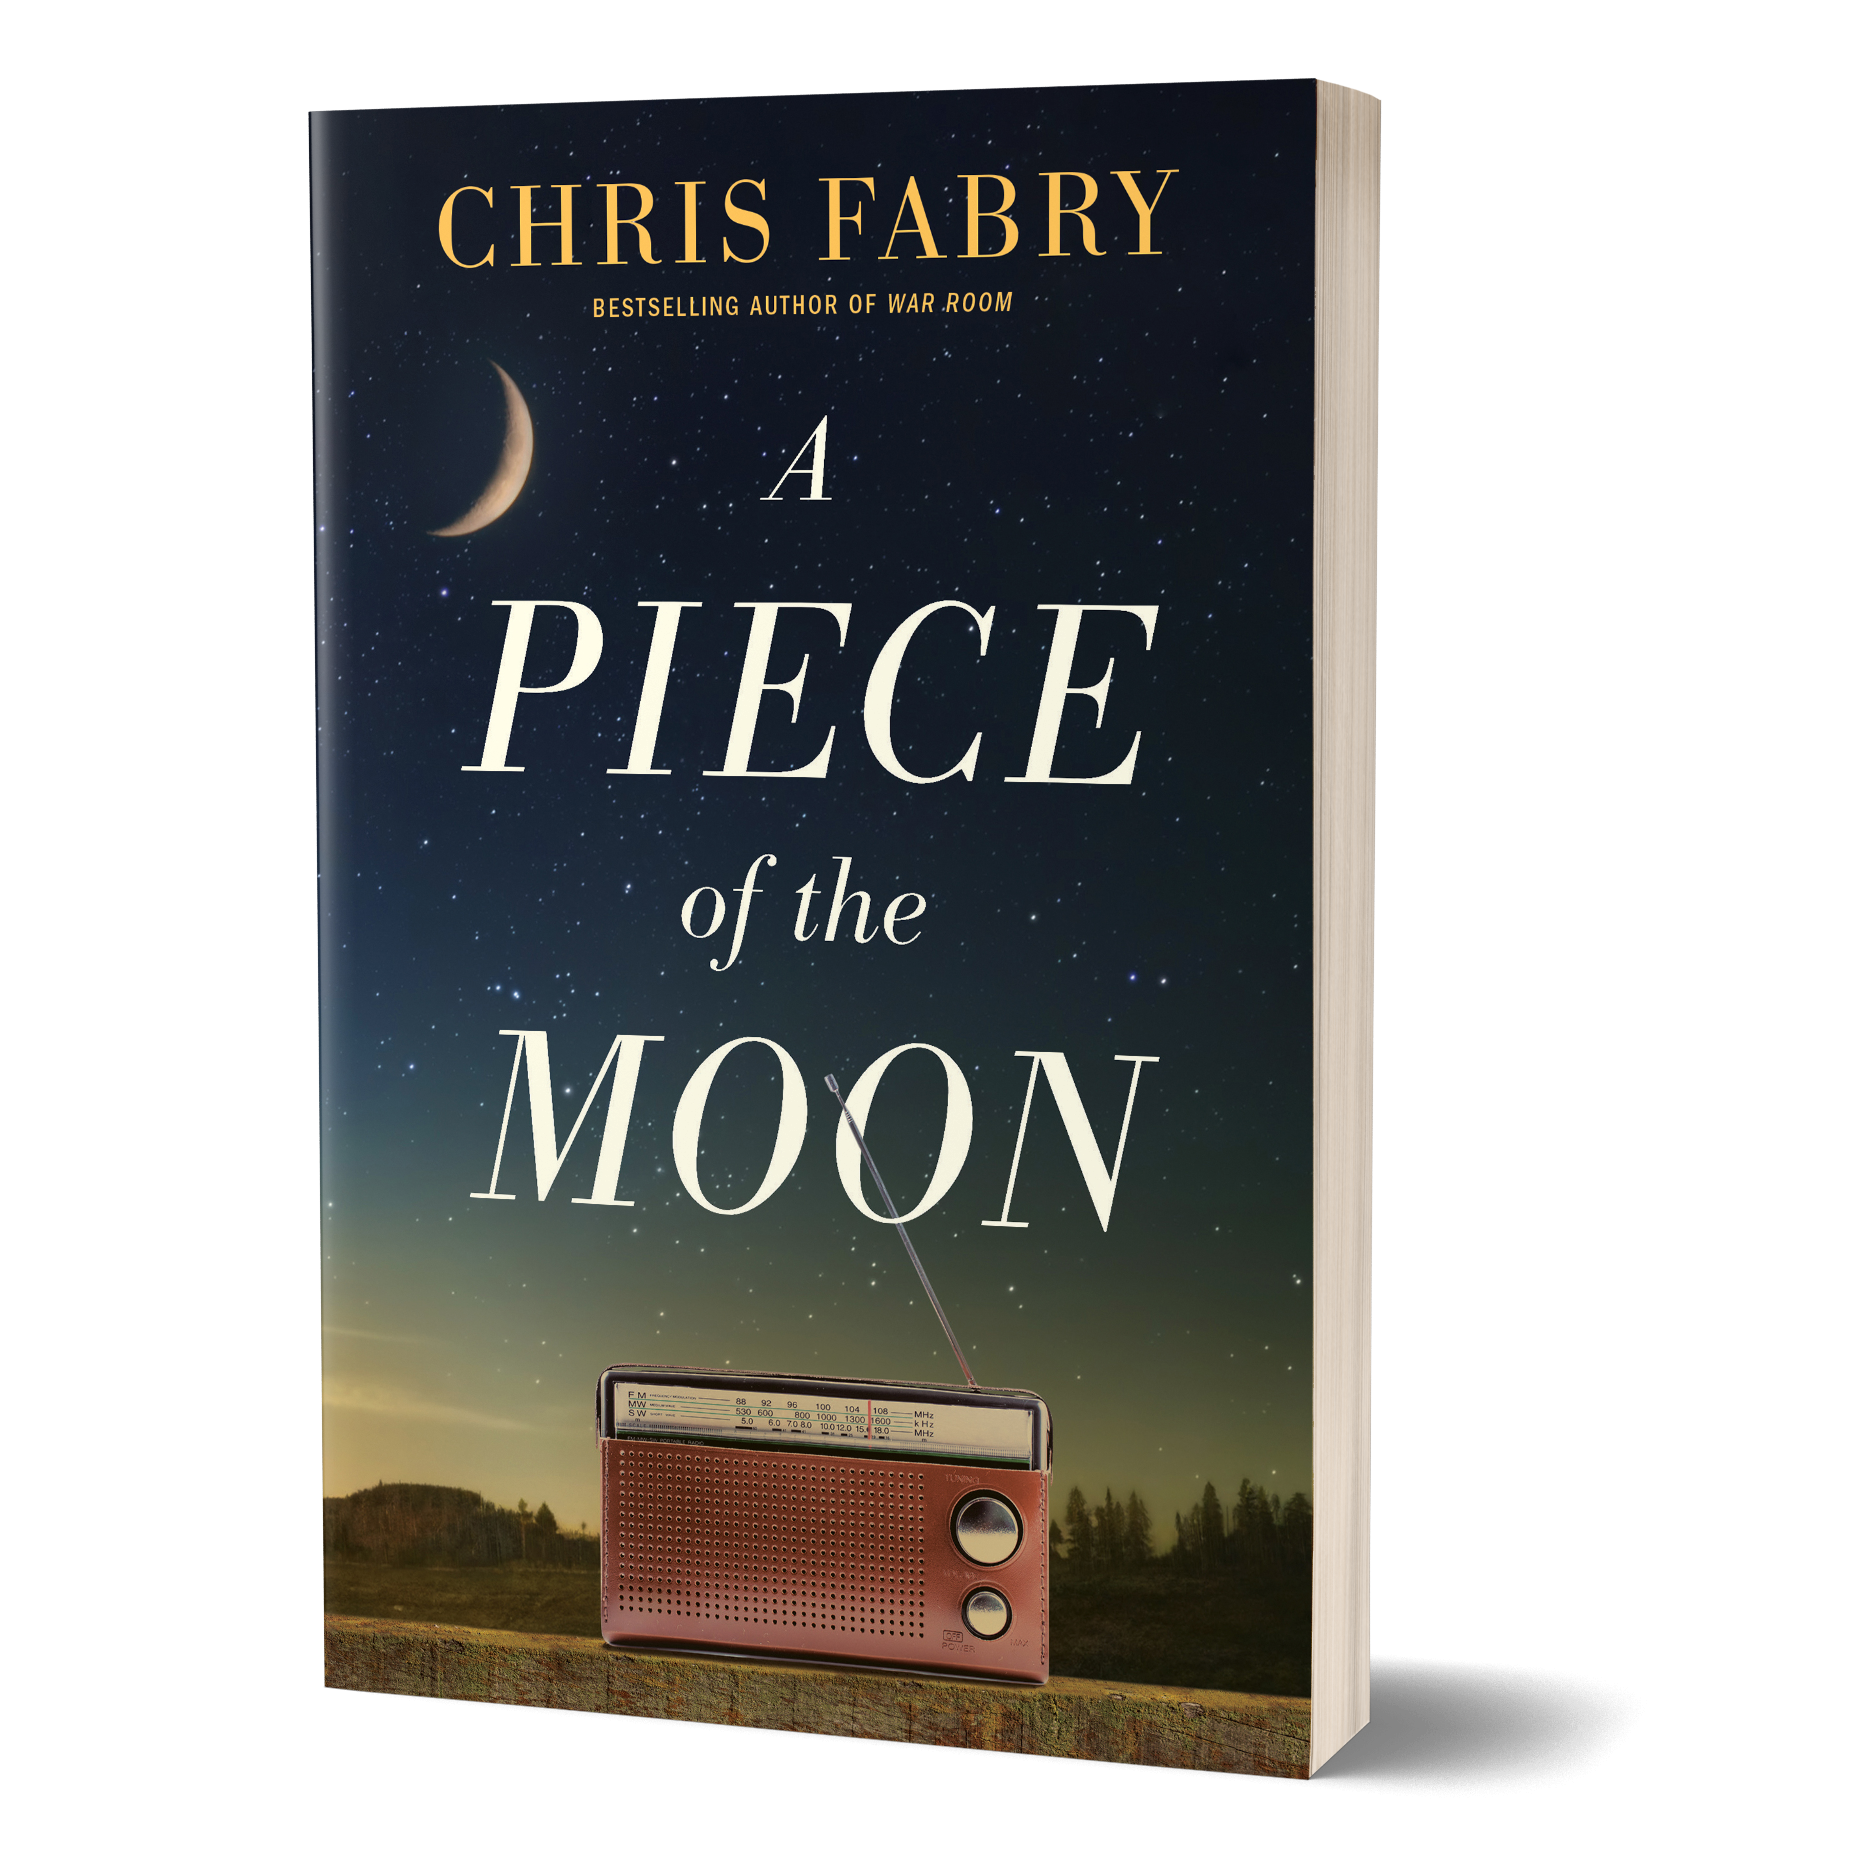 The Southern fiction novel A Piece of the Moon by bestselling, award-winning Christian fiction author Chris Fabry